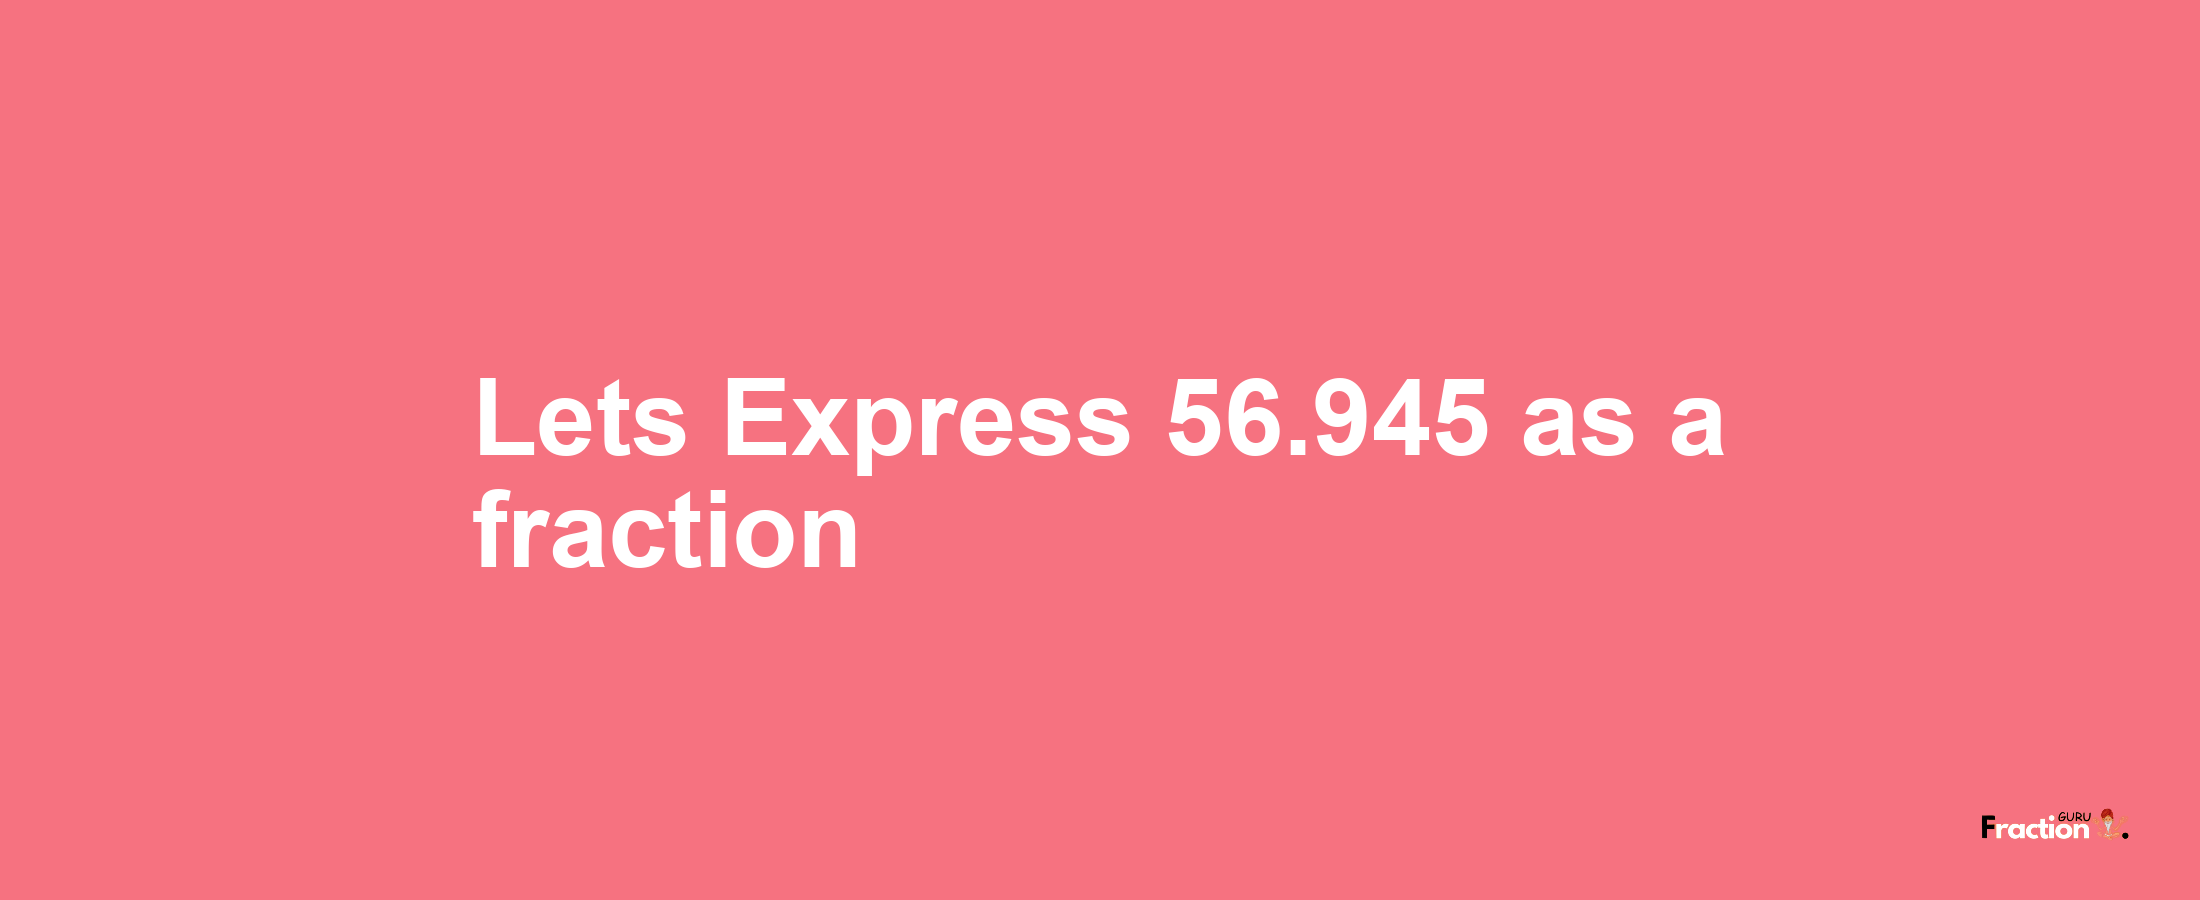 Lets Express 56.945 as afraction